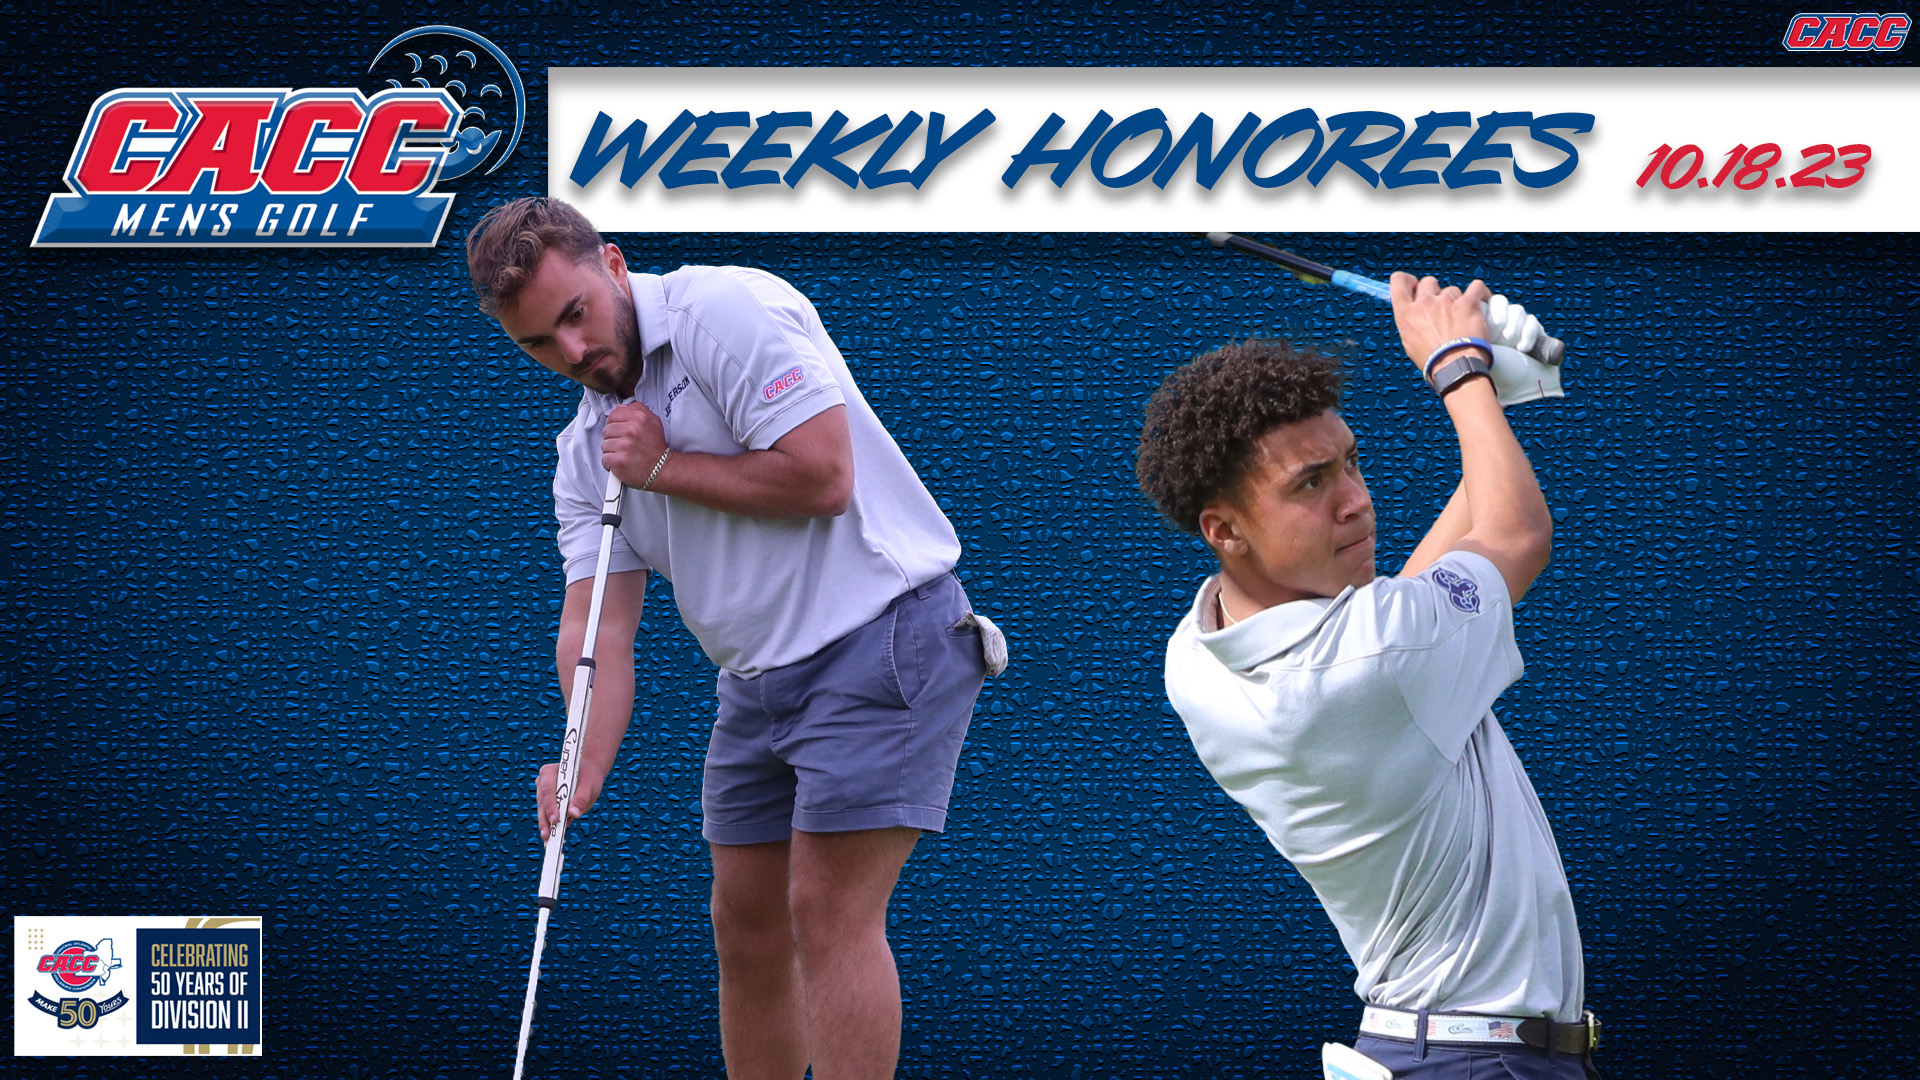 CACC Men's Golf Weekly Honorees (10-18-23)